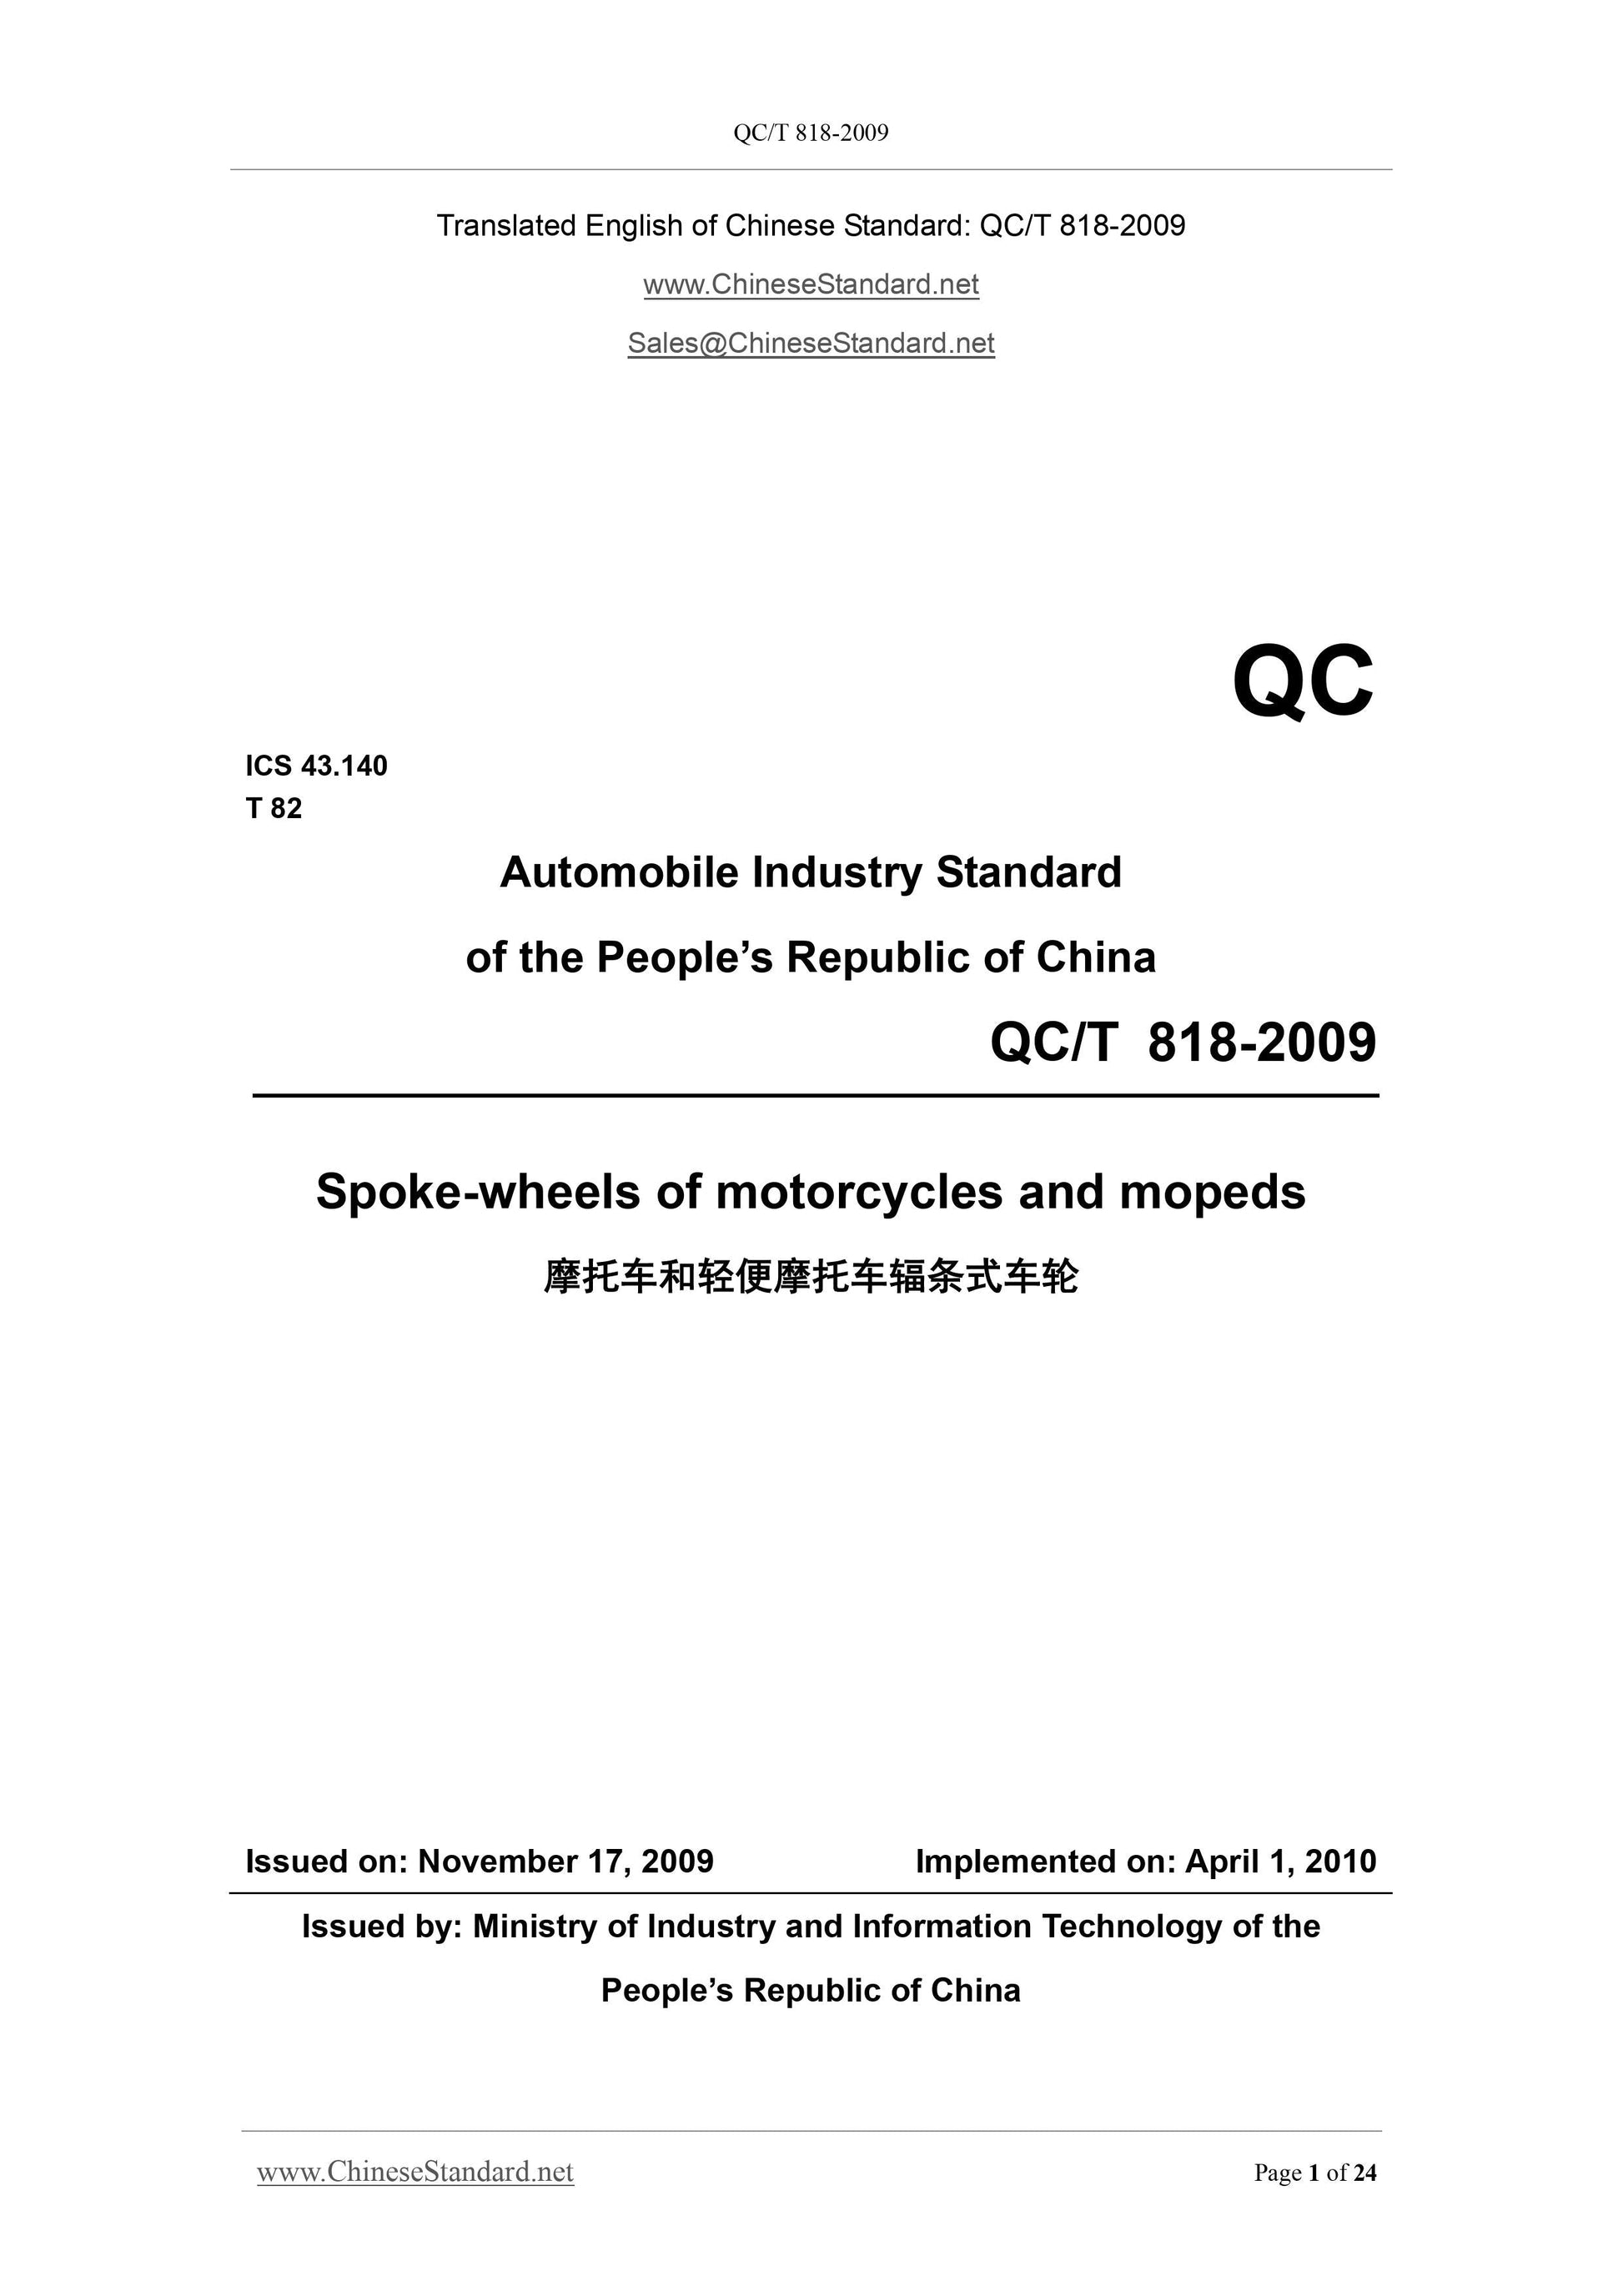 QC/T 818-2009 Page 1